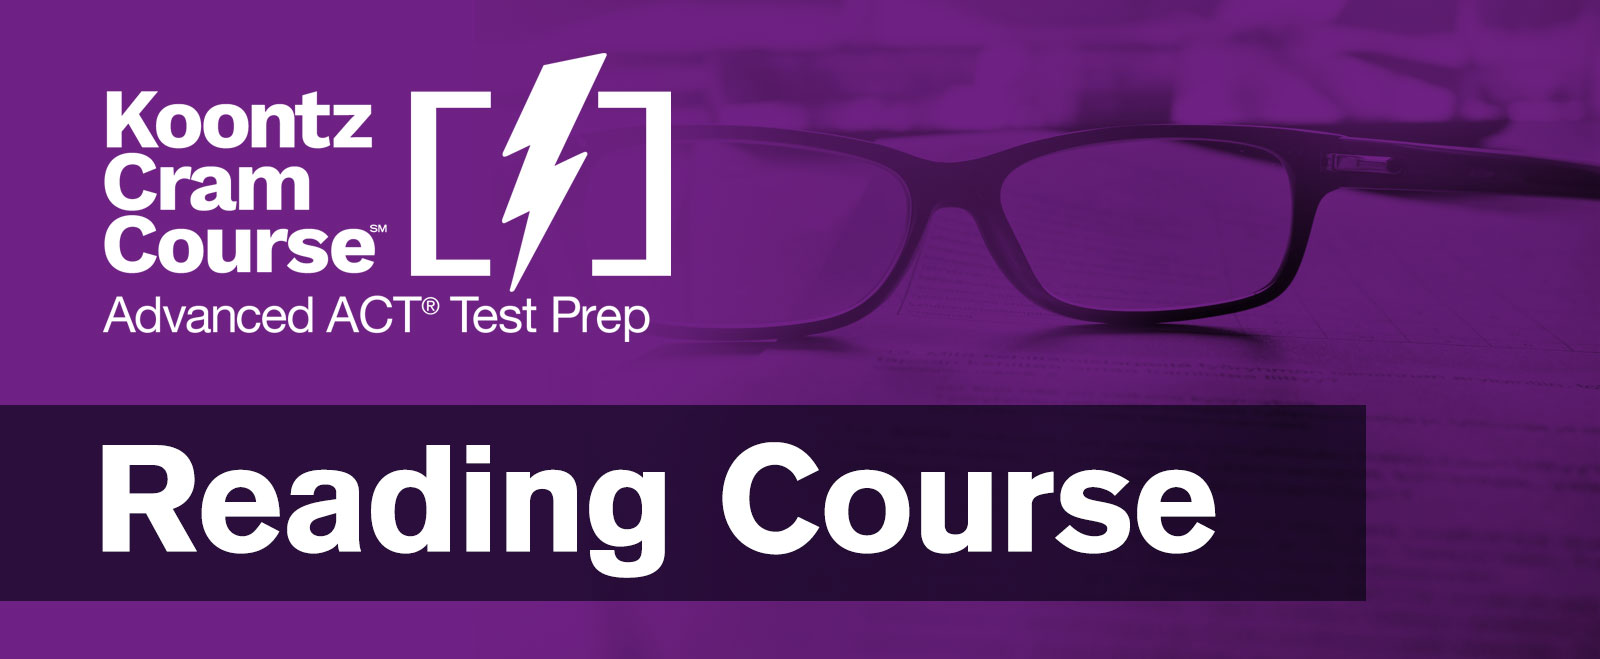 Reading Course